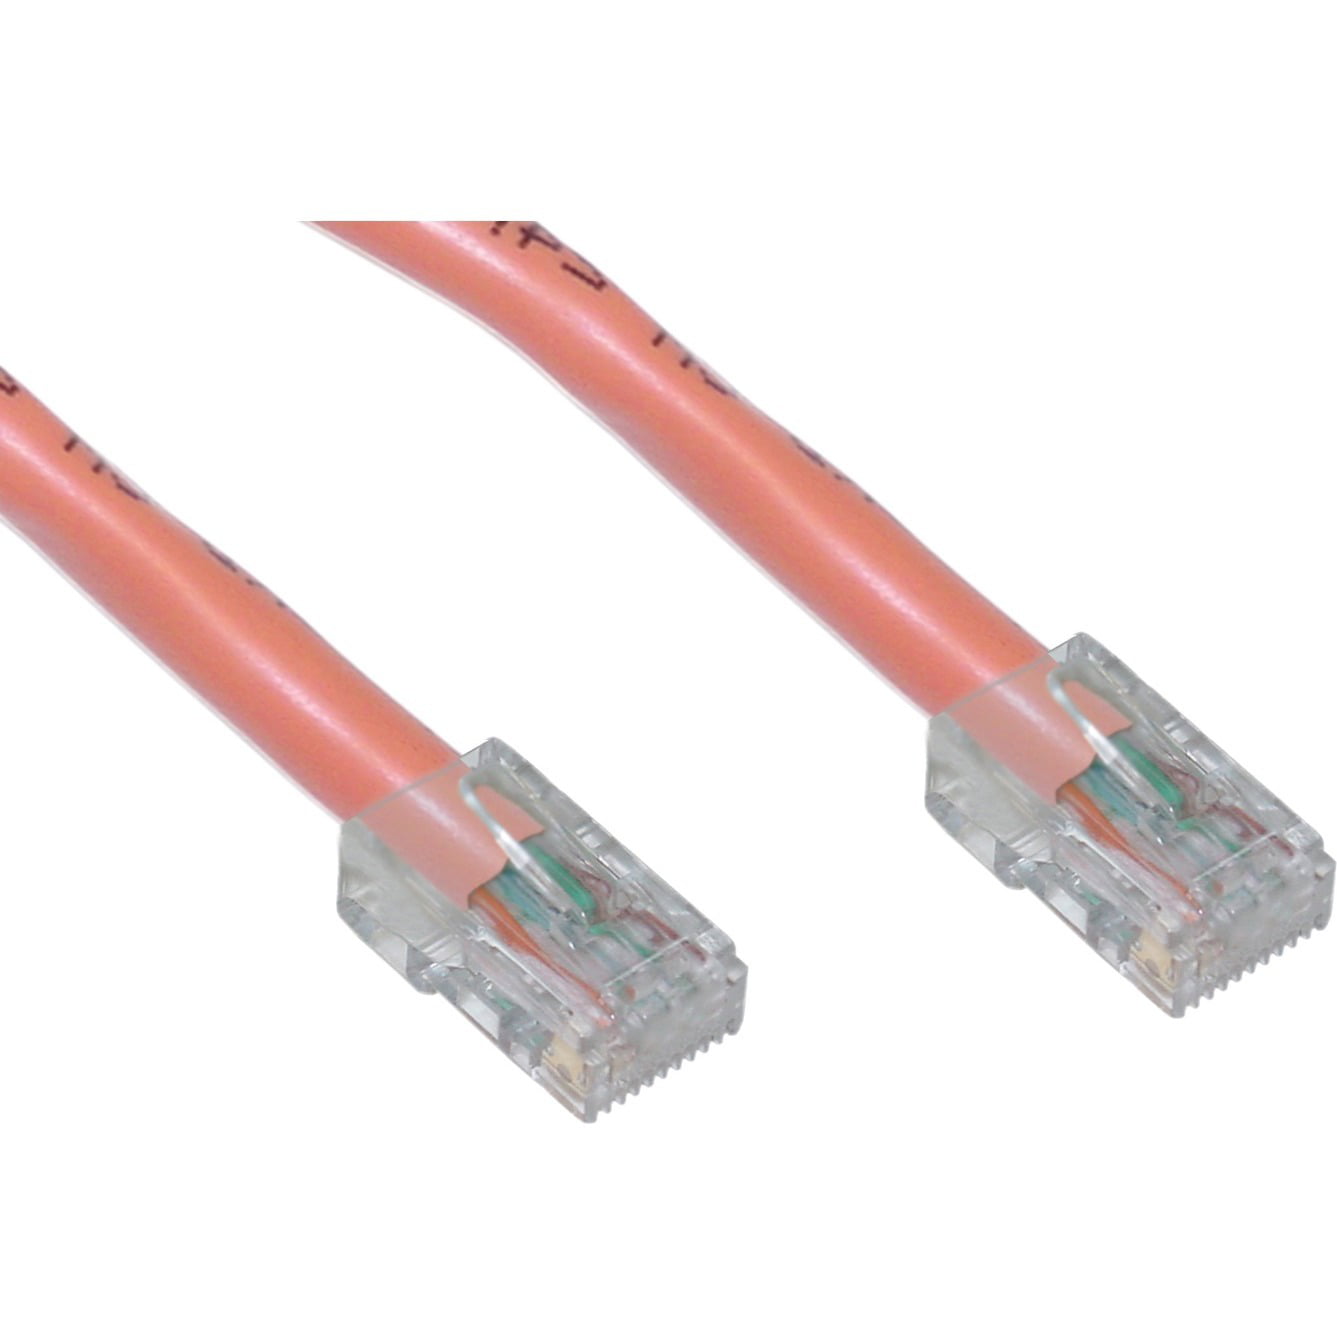 Orange CNE479298 2 Pack Bootless Cat6 Ethernet Patch Cable 14 Feet 